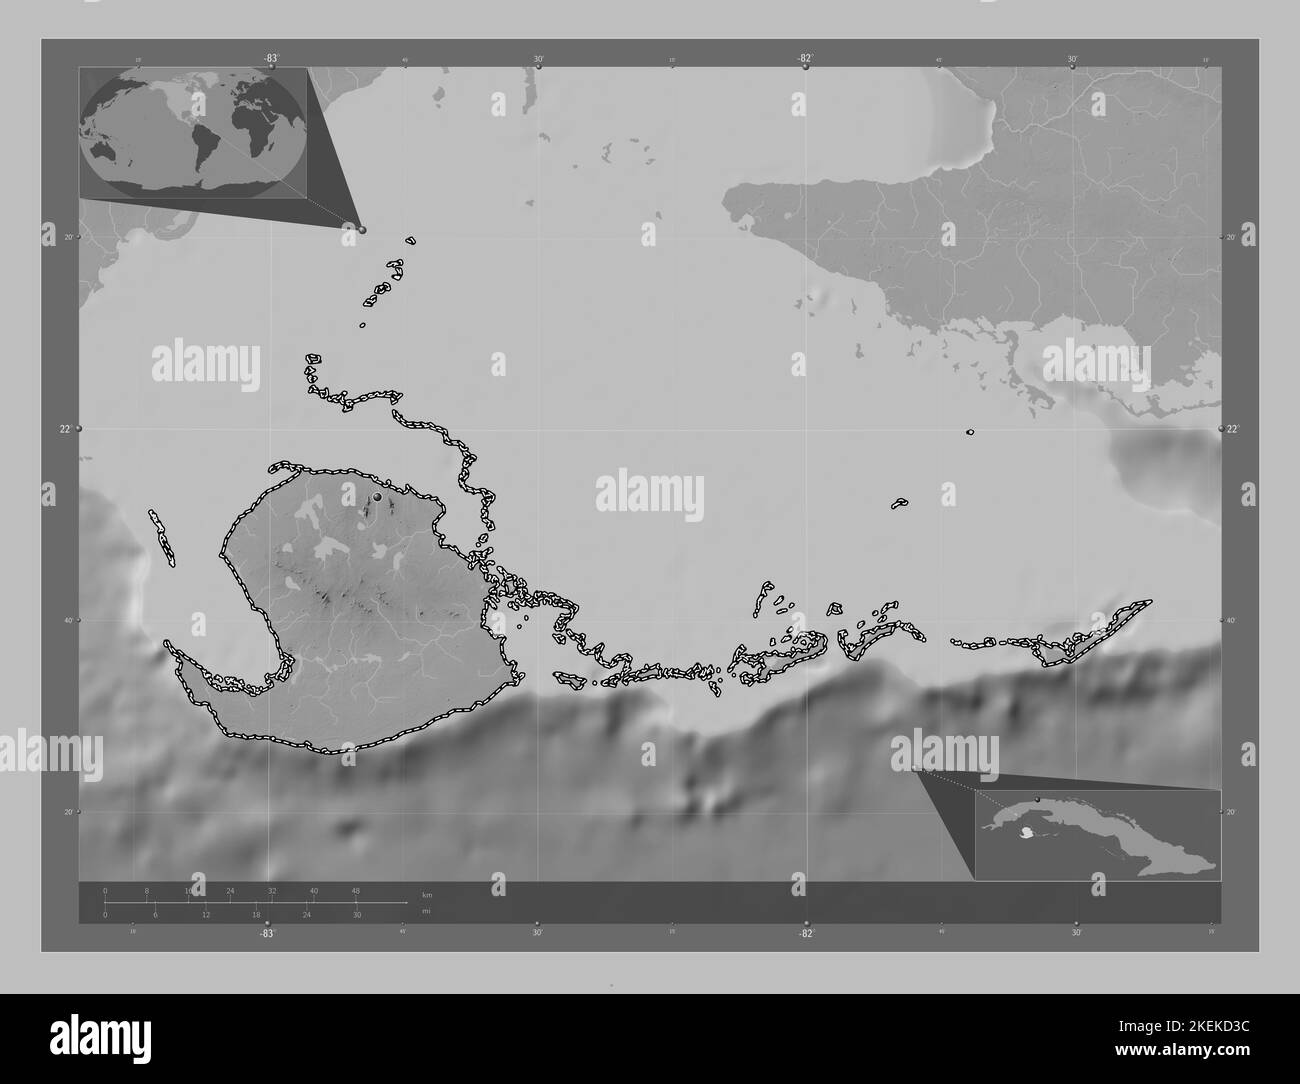 Isla de la Juventud, province of Cuba. Grayscale elevation map with lakes and rivers. Corner auxiliary location maps Stock Photo